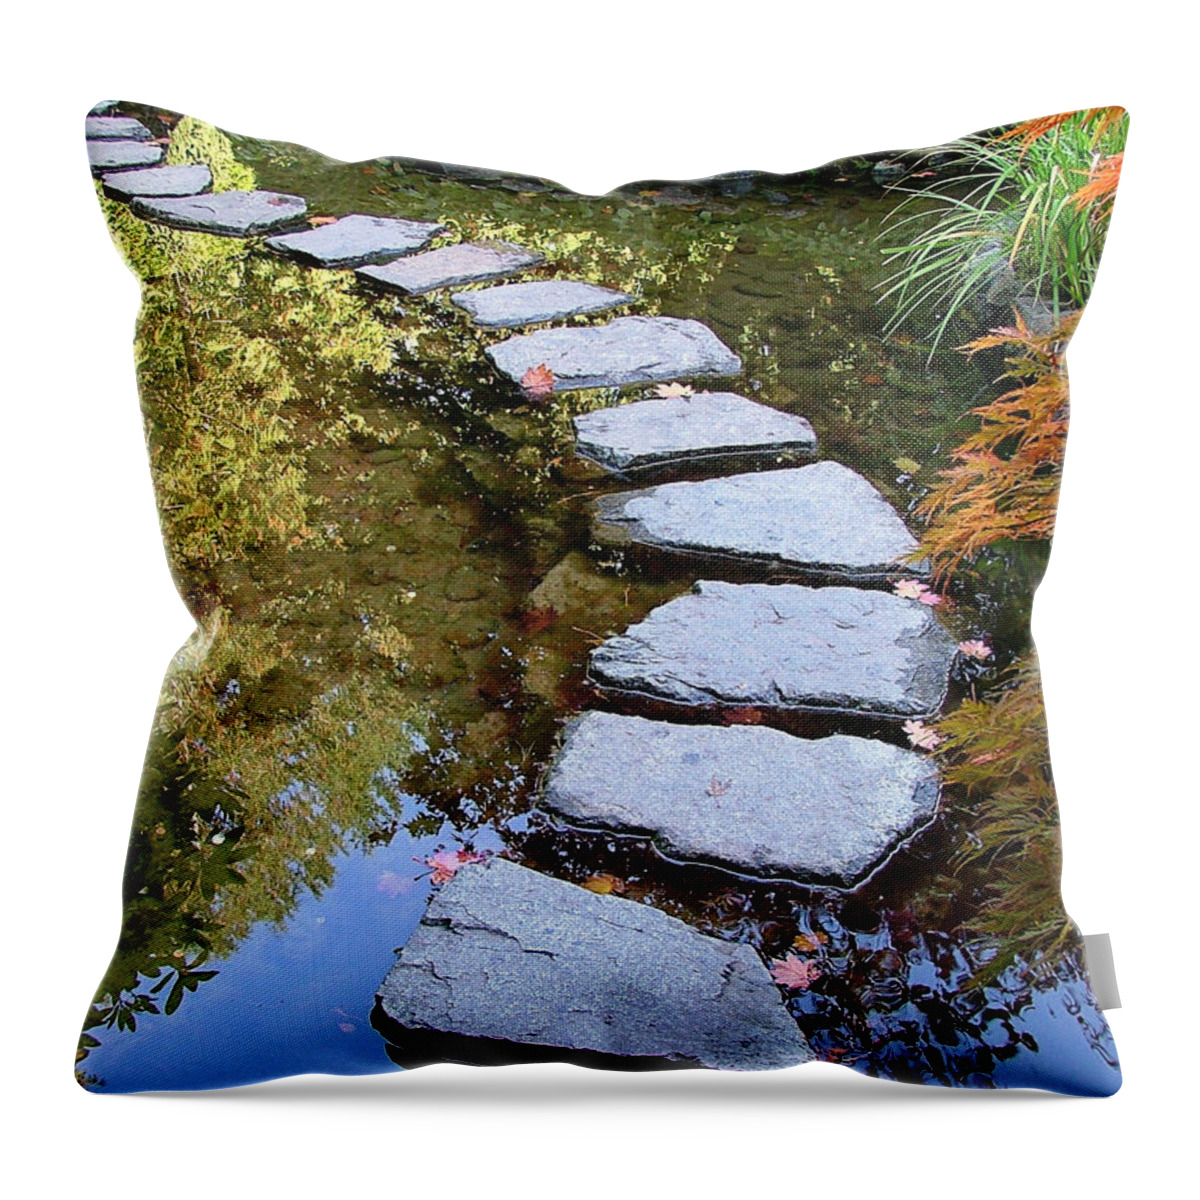 Ponds Throw Pillow featuring the photograph Walk On Water by Wendy McKennon